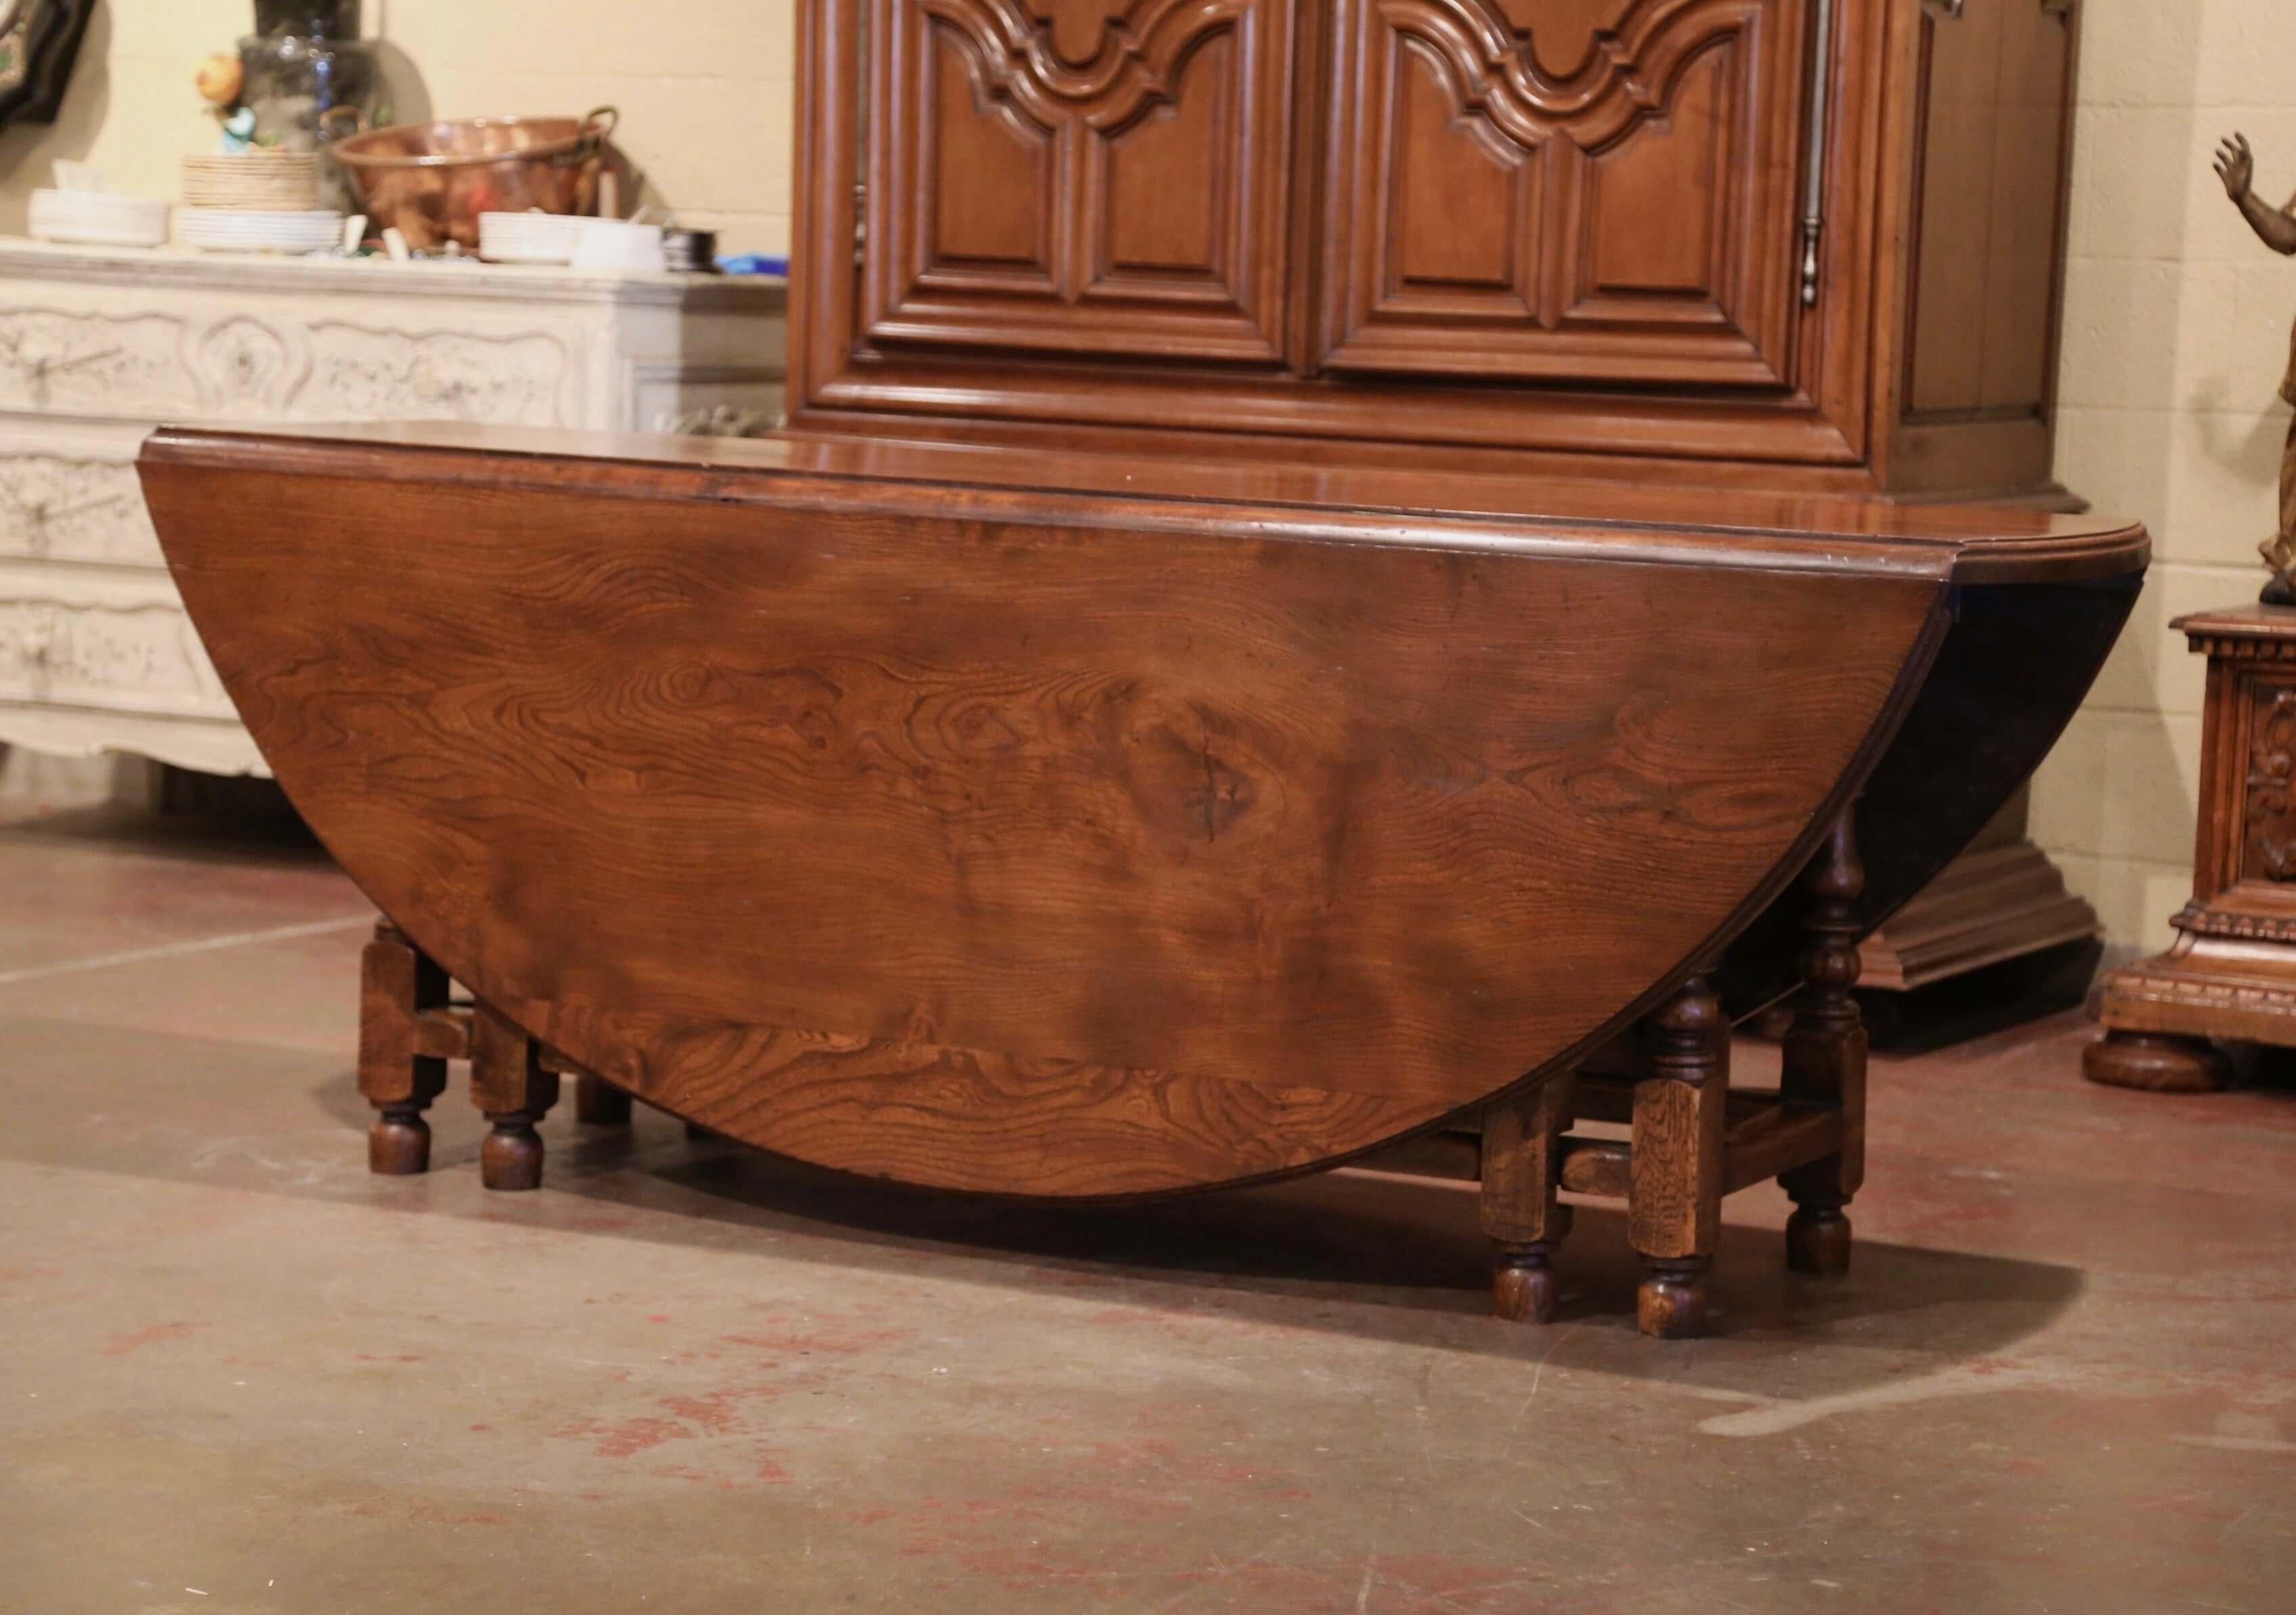 Midcentury English Carved Chestnut Eight Gate-Leg Drop-Leaf Oval Table (Patiniert) im Angebot